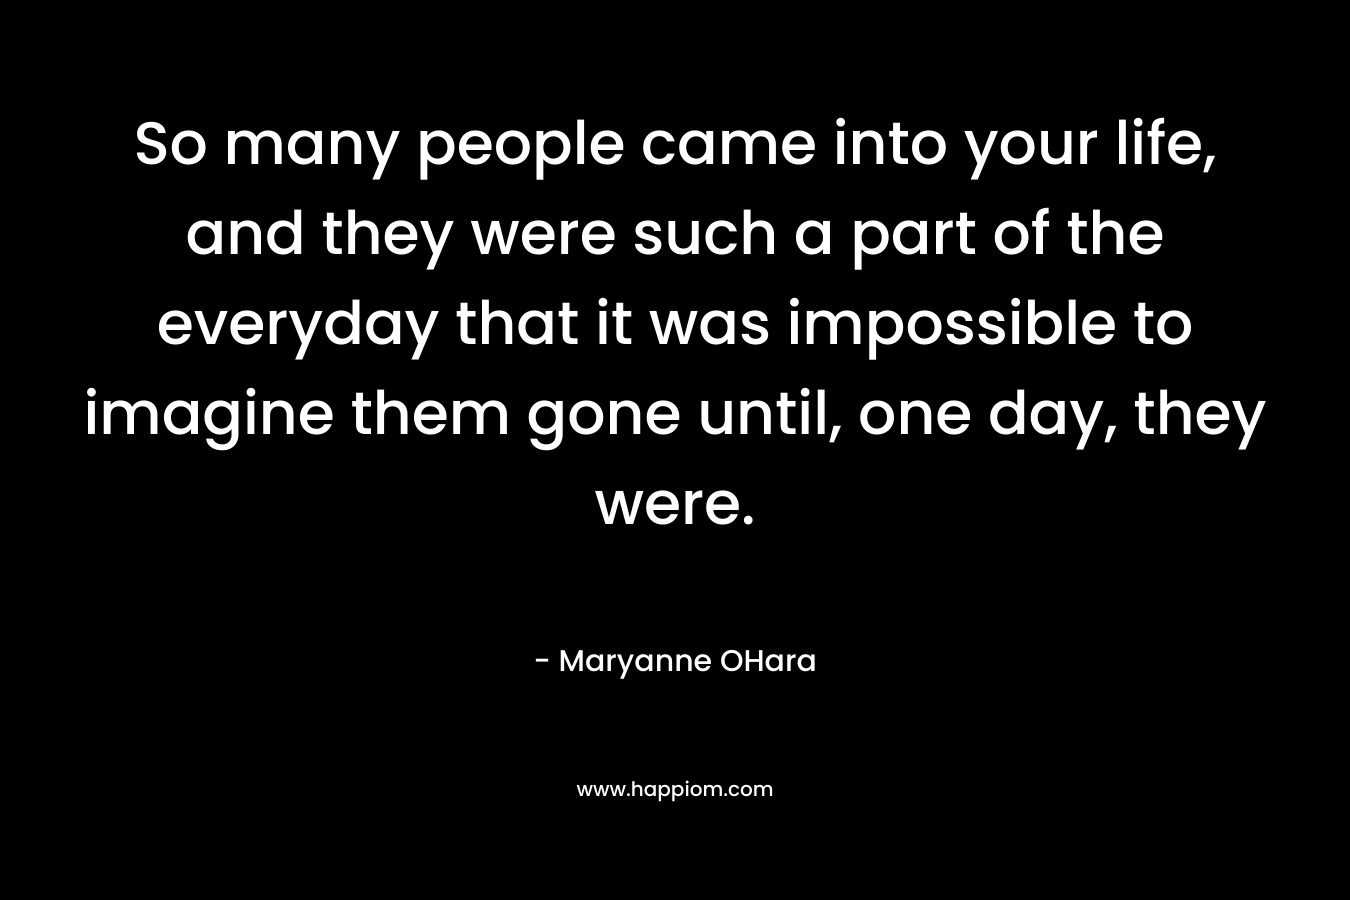 So many people came into your life, and they were such a part of the everyday that it was impossible to imagine them gone until, one day, they were.